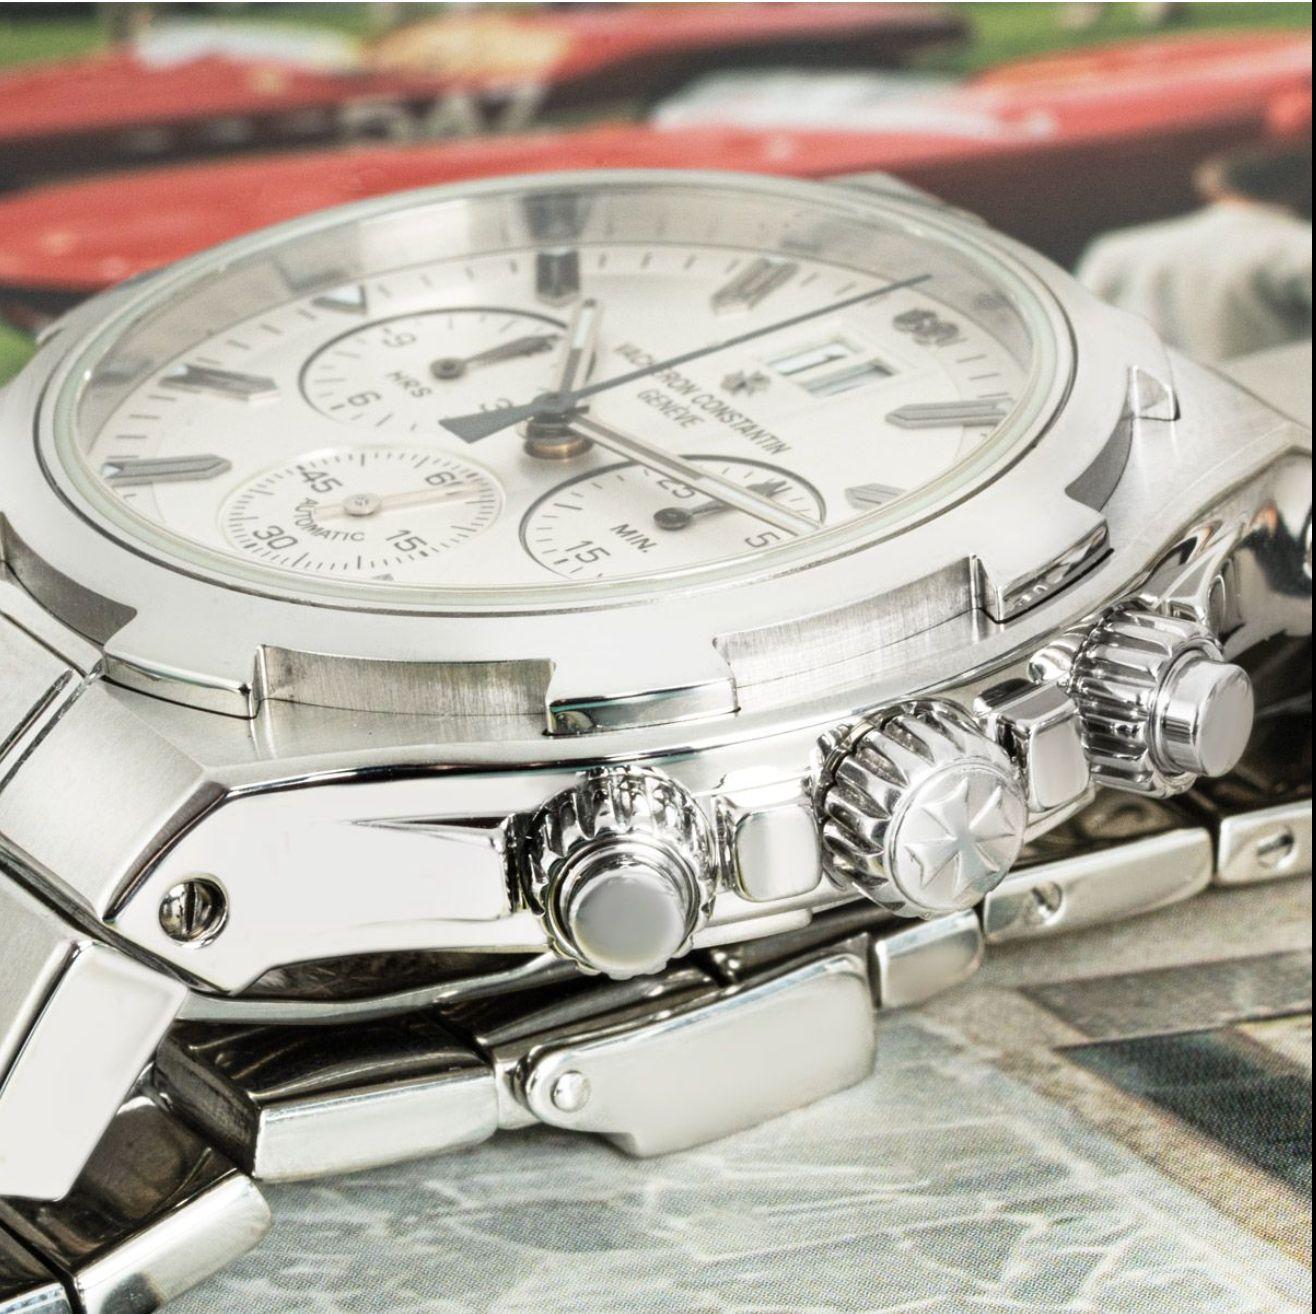 A stainless steel Overseas Chronograph wristwatch by Vacheron Constantin. Featuring a silver dial with applied hour markers, a date aperture, 3 chronograph counters and a fixed stainless steel bezel. Fitted with a sapphire glass, an automatic